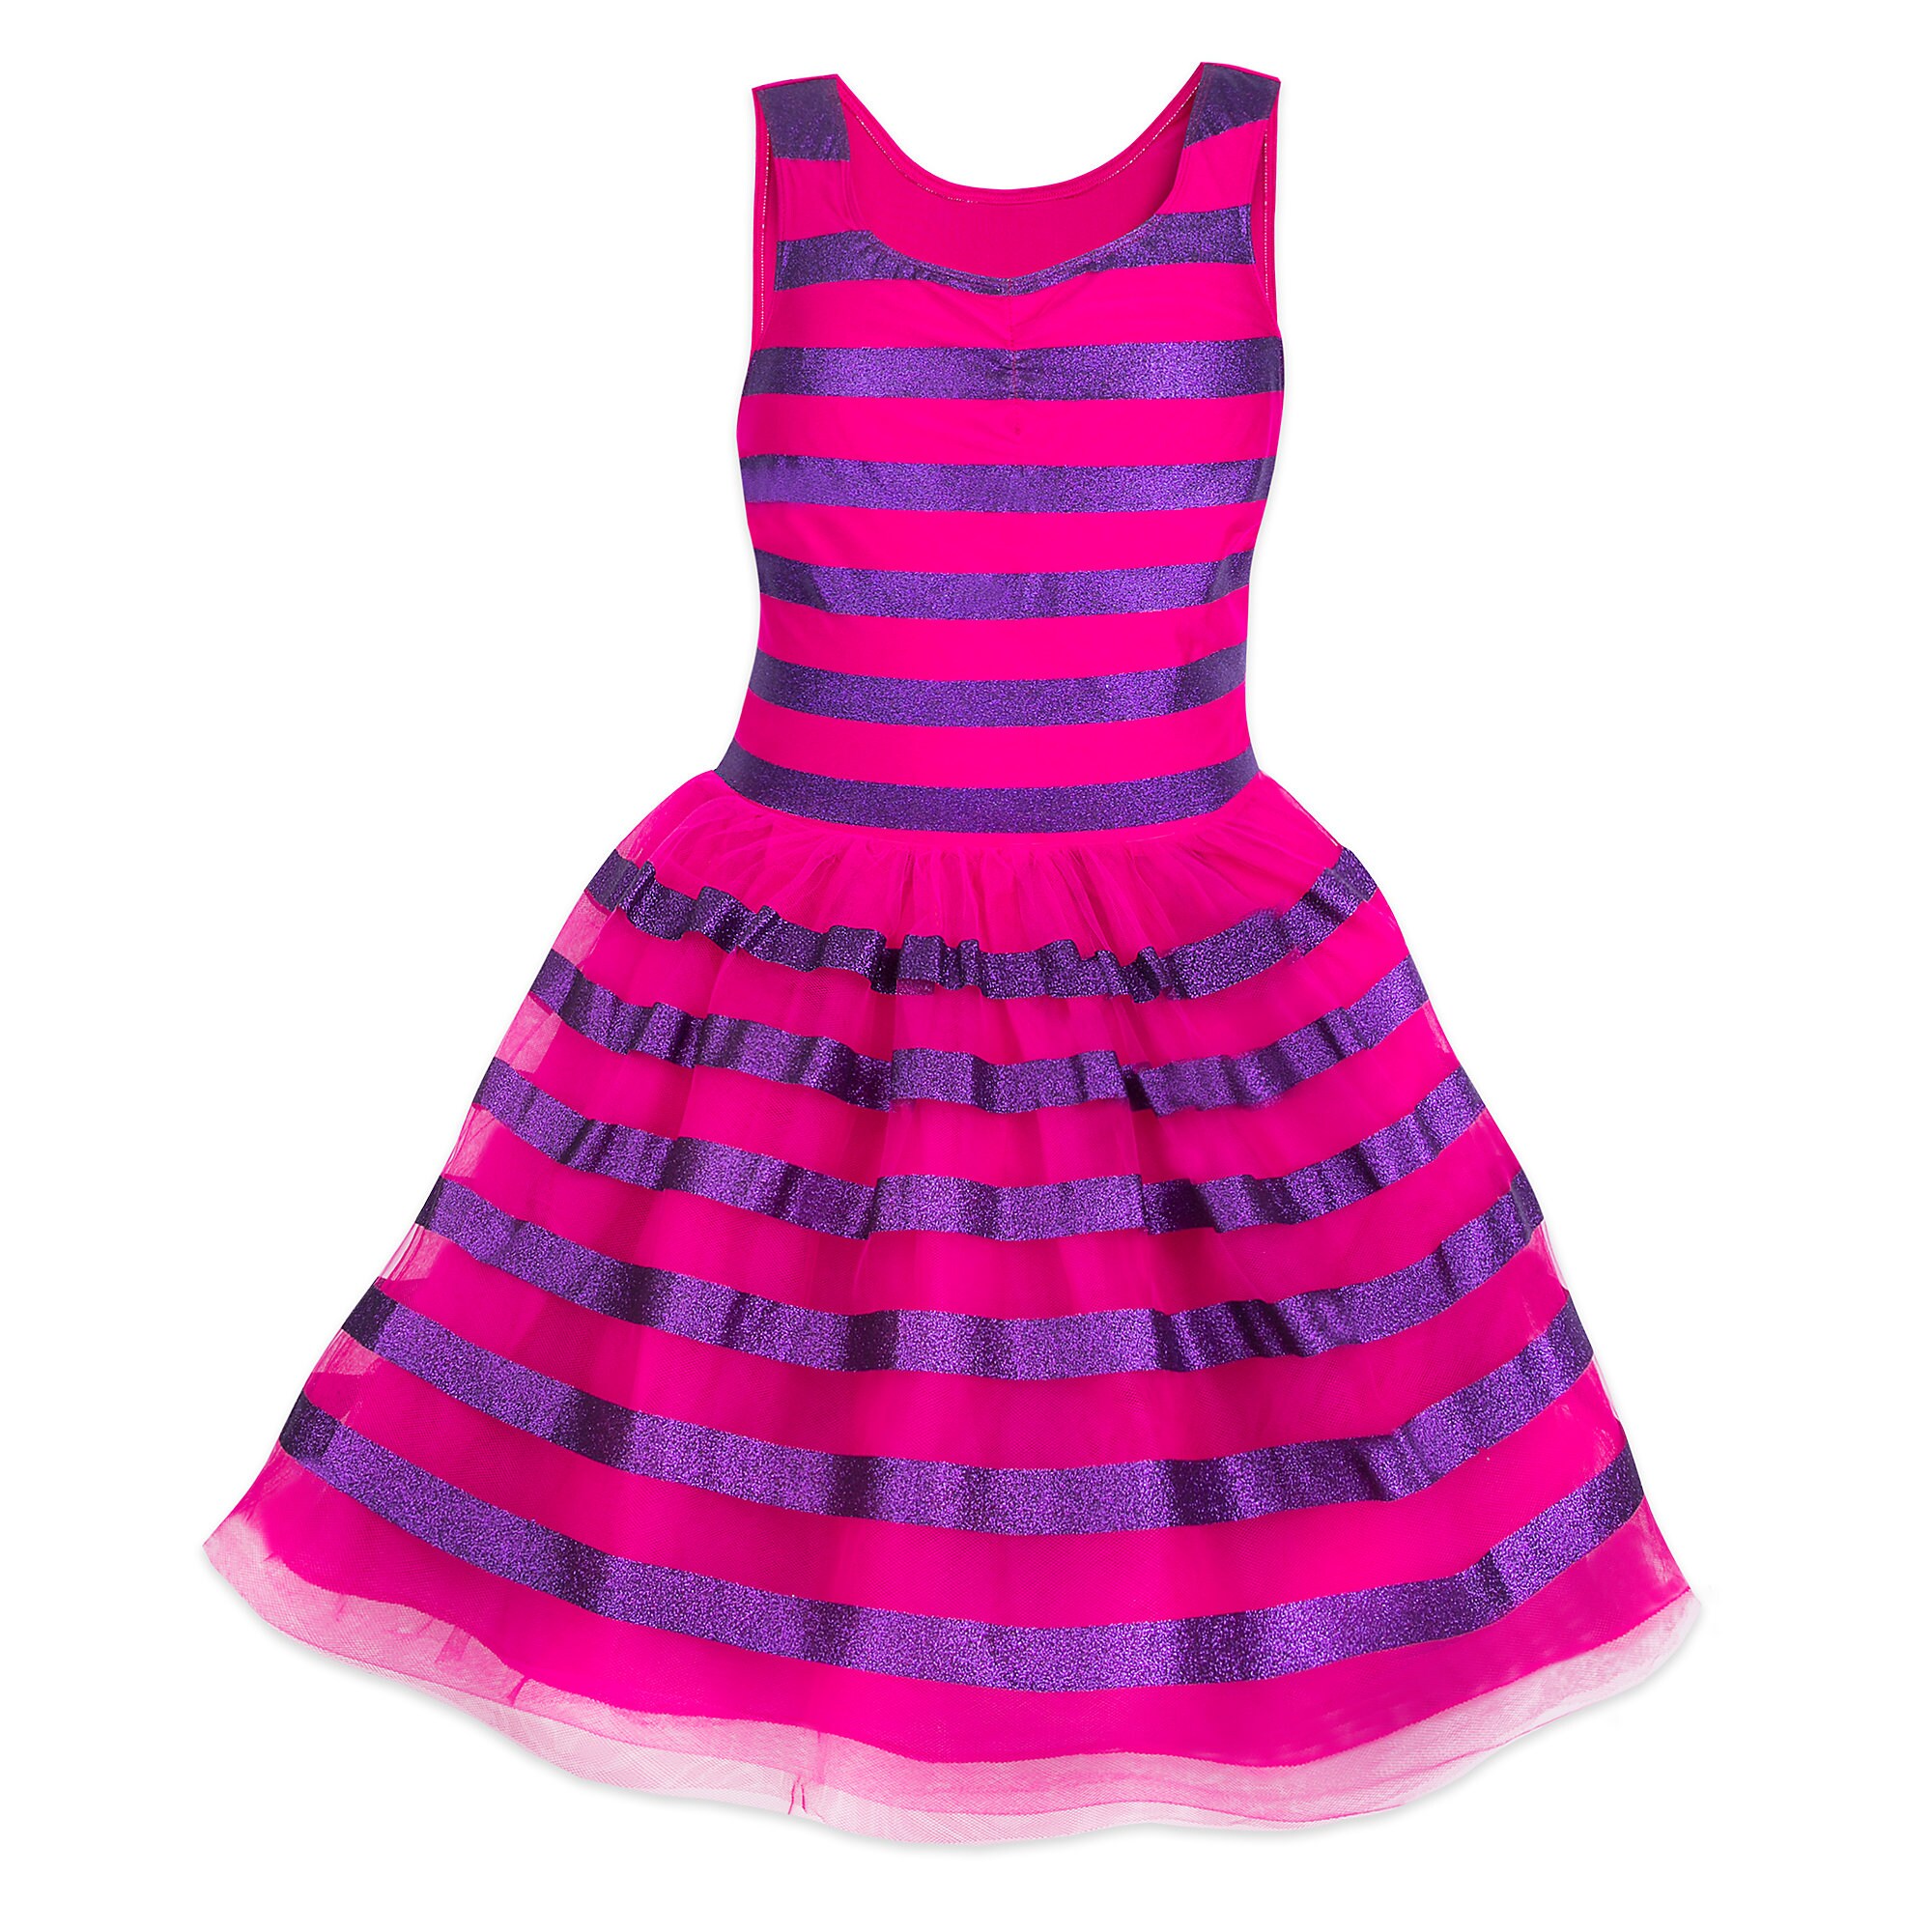 Cheshire Cat Costume with Tutu for Adults - Alice in Wonderland